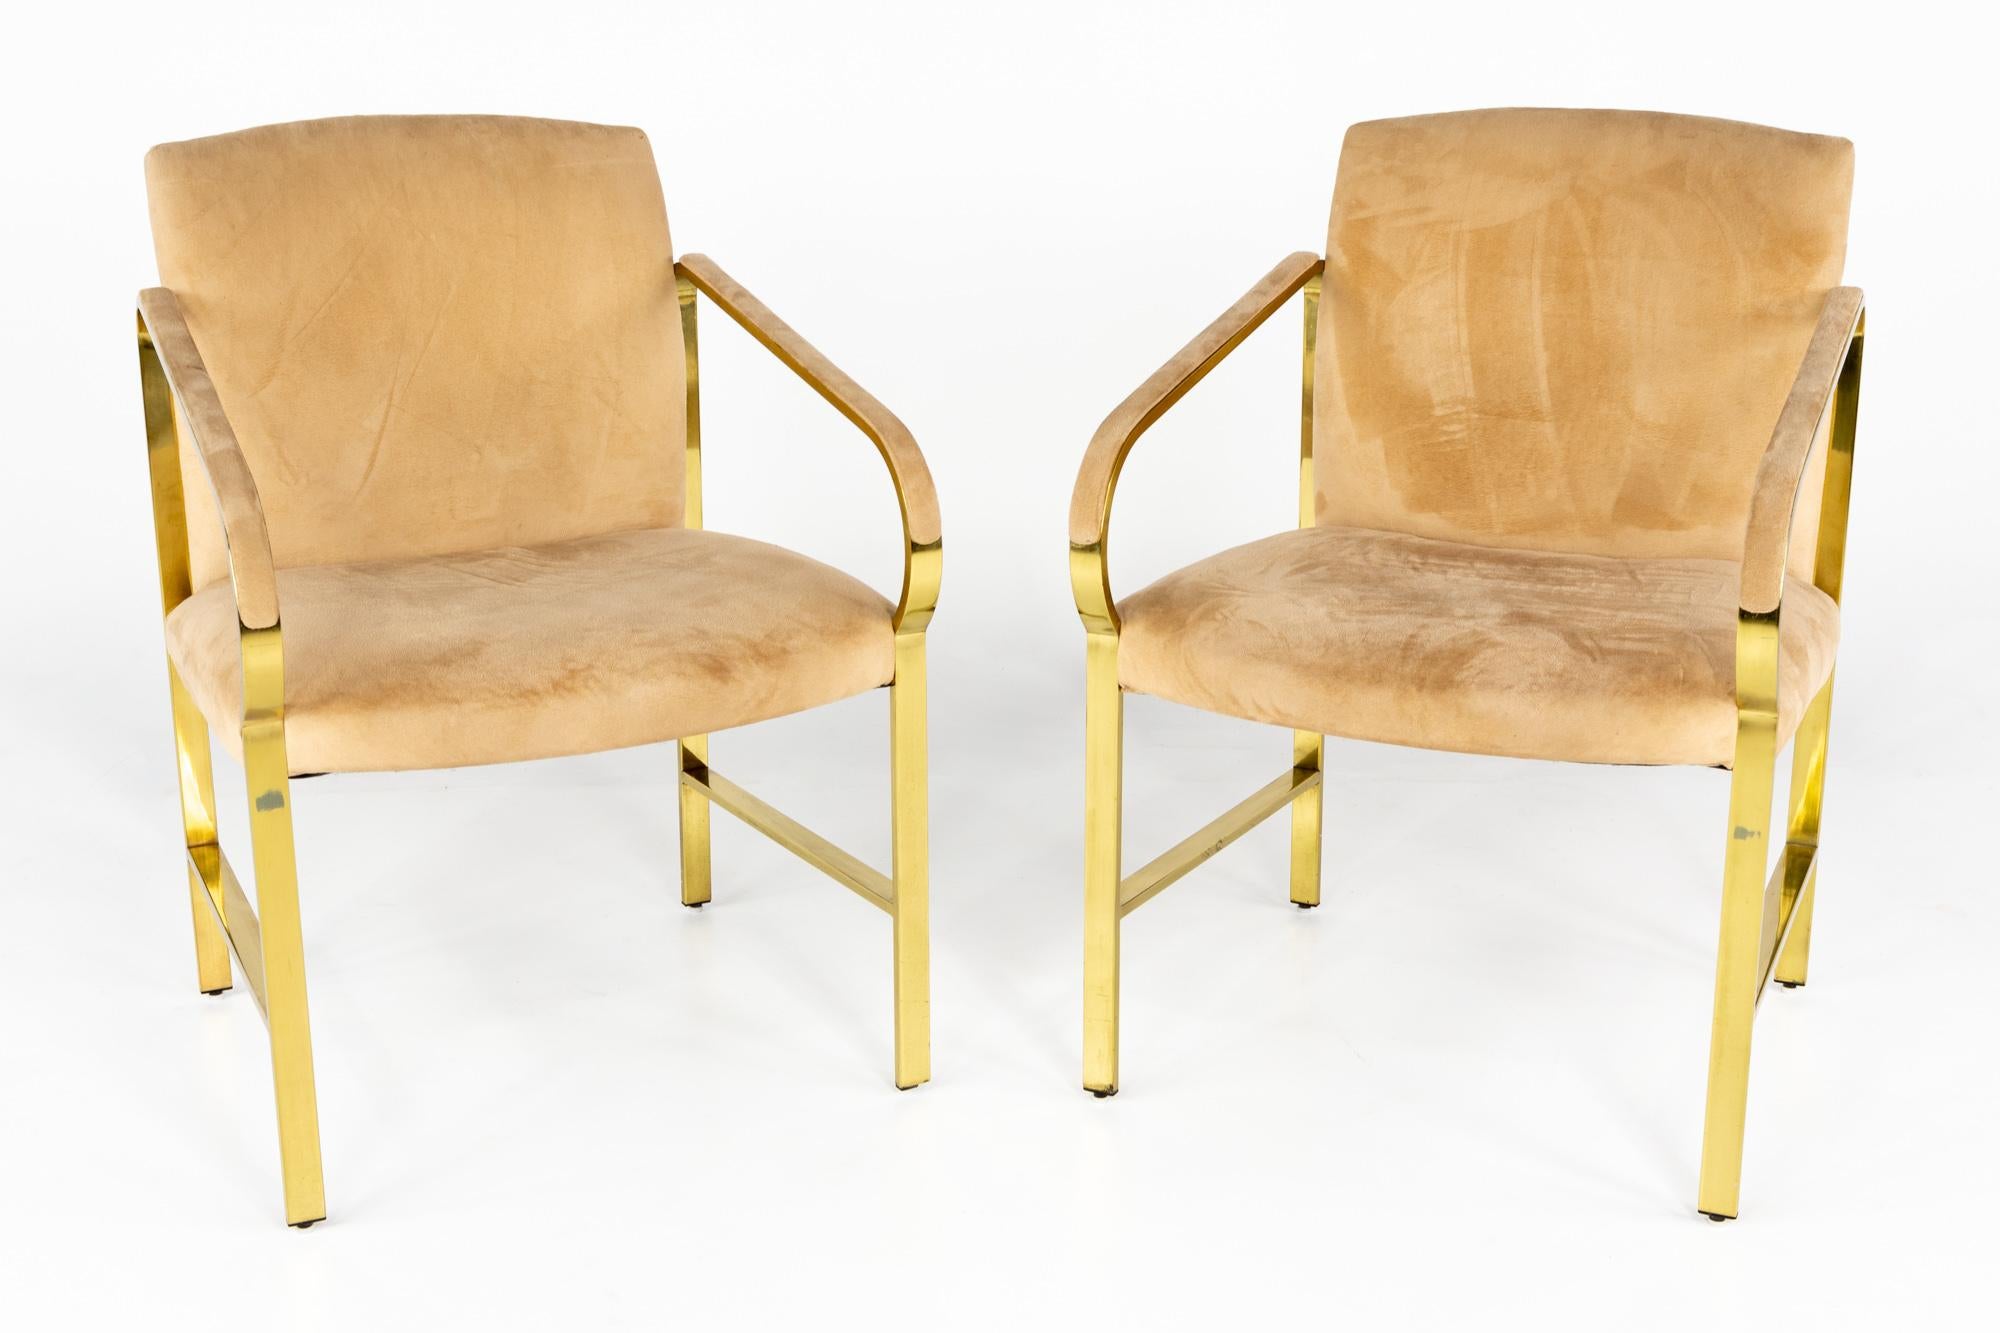 Baker Furniture mid century brass arm chairs - a pair

Each chair measures: 22 wide x 25 deep x 34 high, with a seat height of 20 inches and arm height of 25 inches 

All pieces of furniture can be had in what we call restored vintage condition.